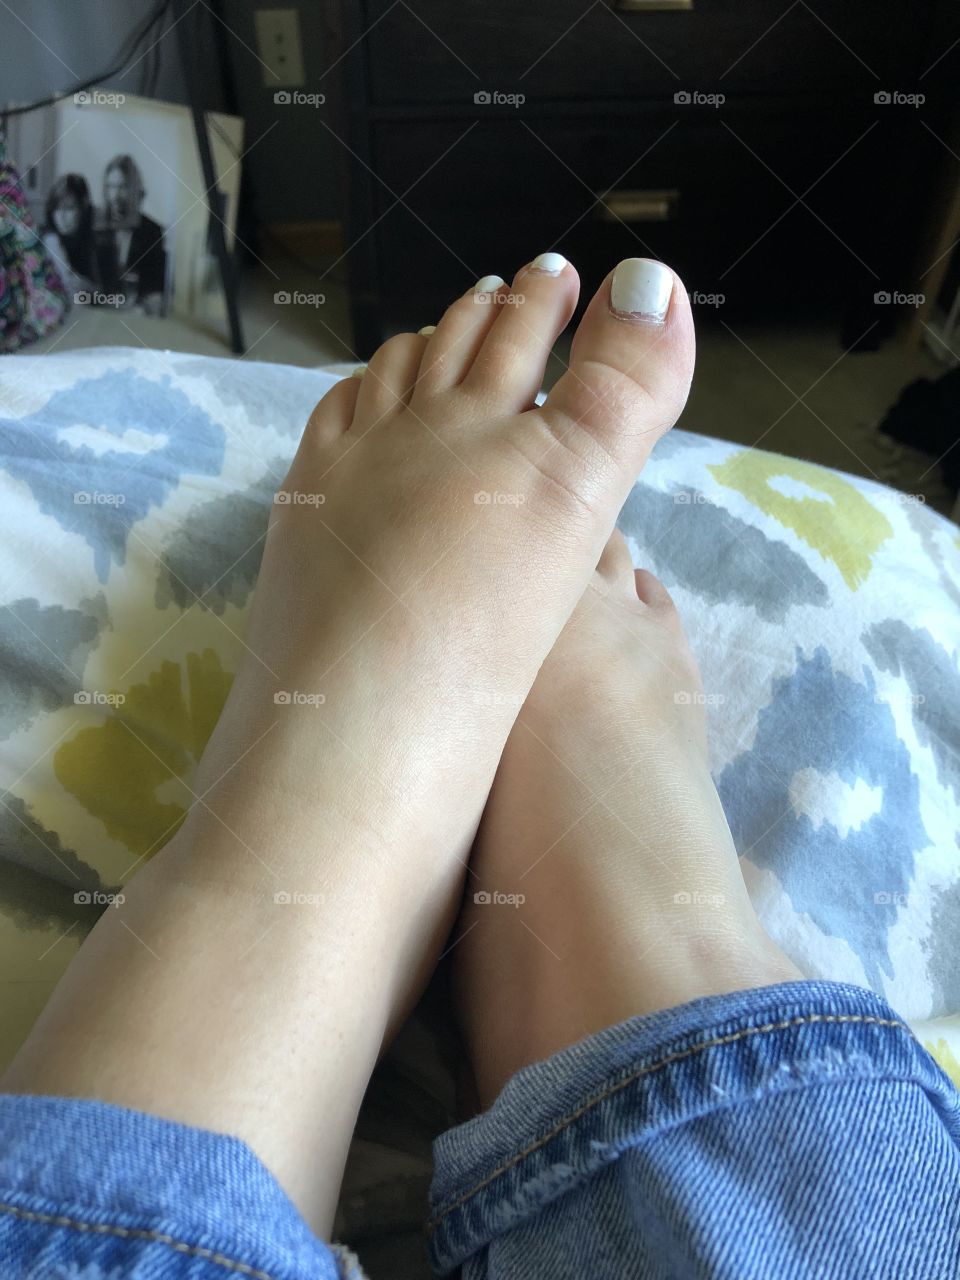 Sneak peak of the feet pictures I am selling! White female, 19 y/o. Requests taken. 